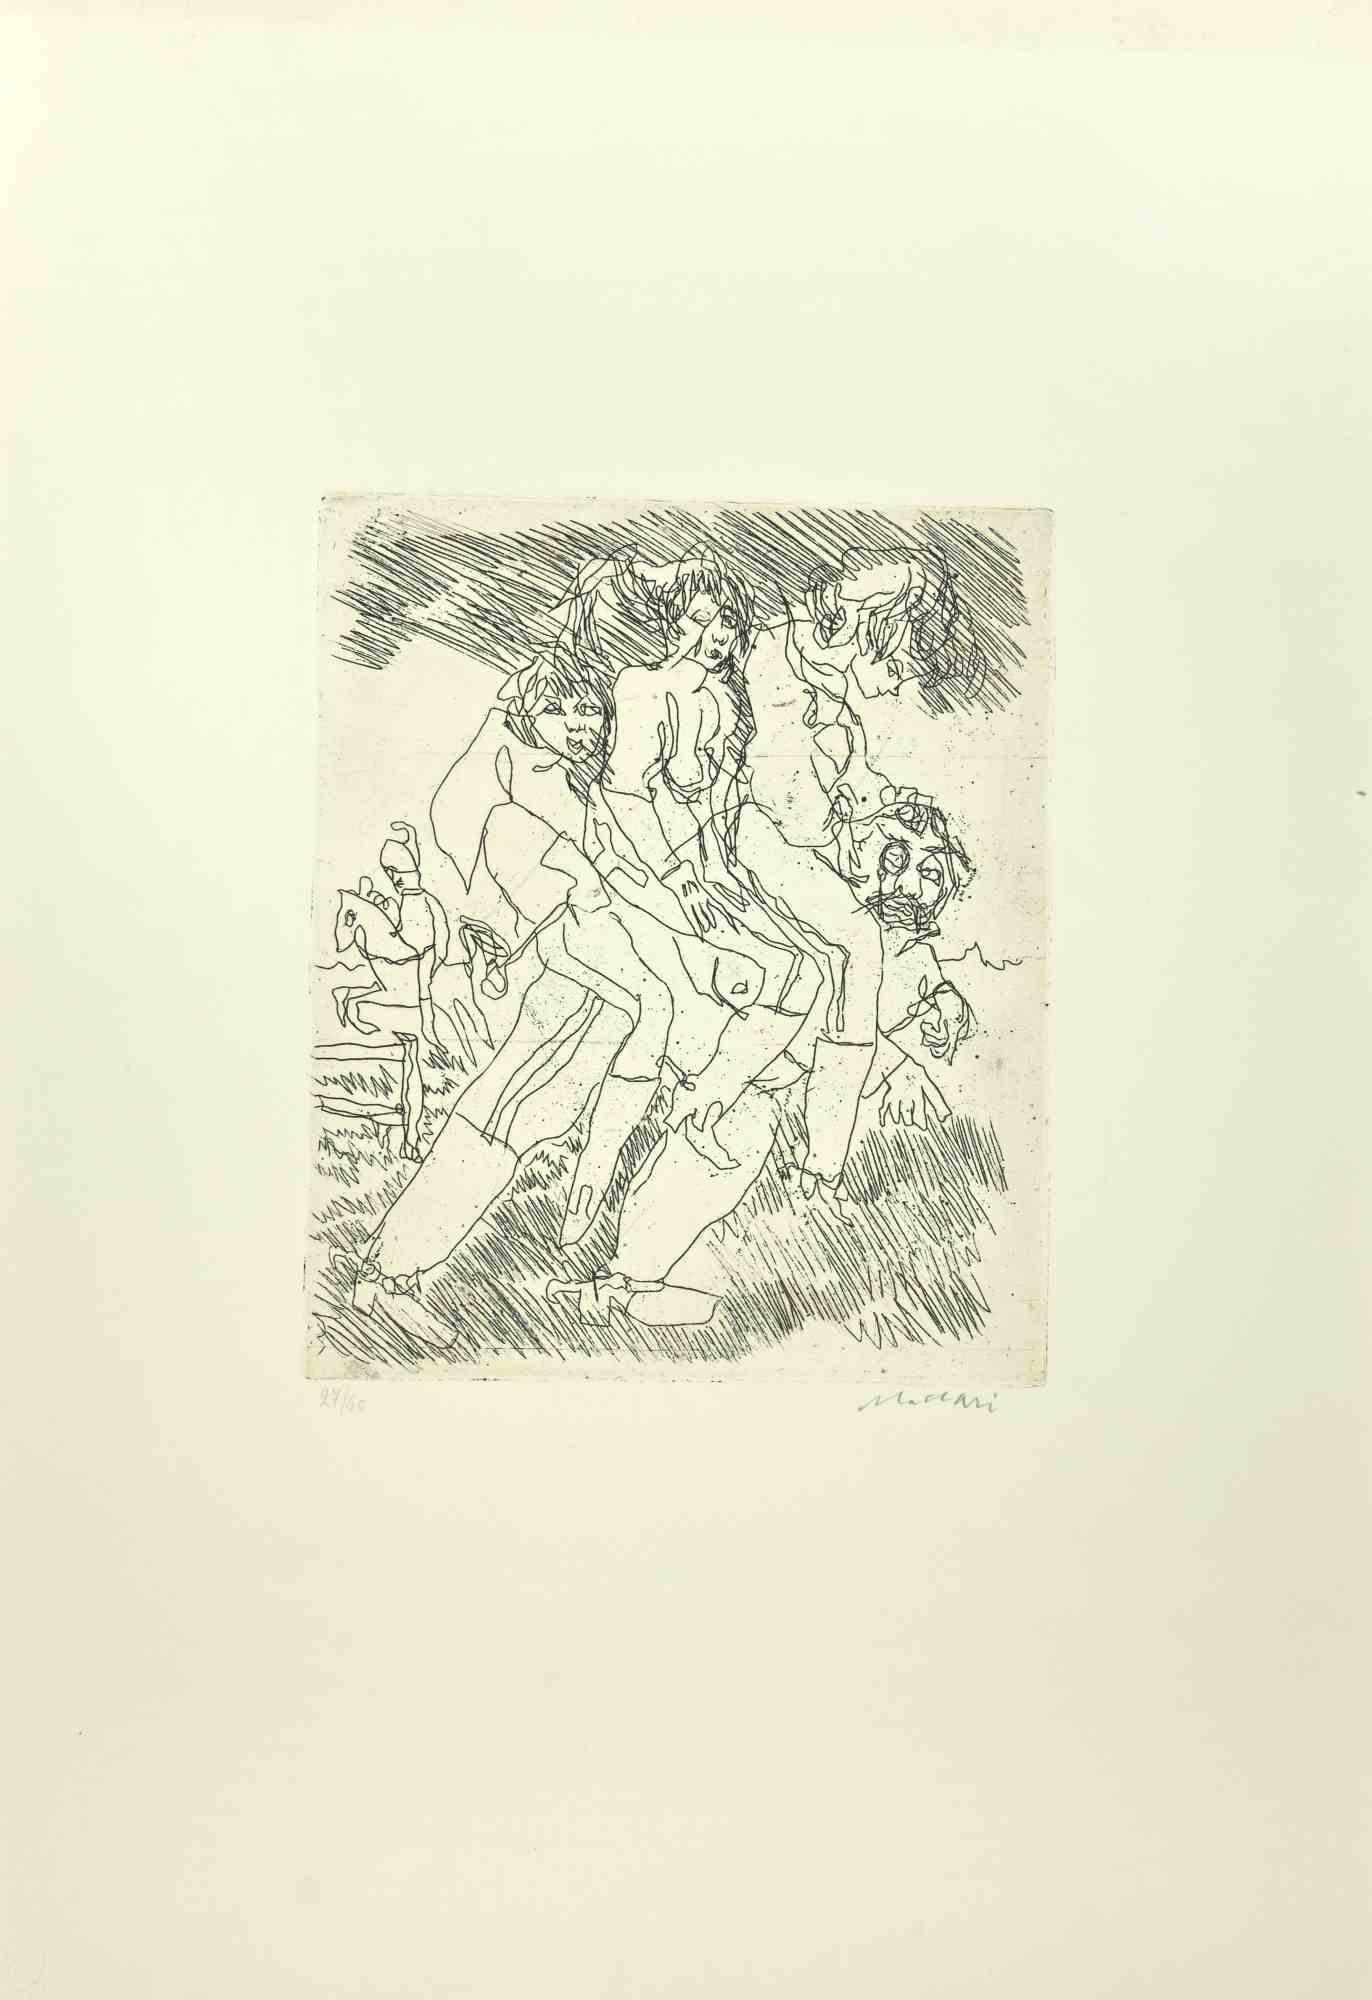 Figures  is an Etching and Drypoint realized by Mino Maccari in the Mid-20th Century.

Hand-signed in the lower right part.

Numbered. Edition,27/50.

Good conditions.

Mino Maccari (Siena, 1924-Rome, June 16, 1989) was an Italian writer, painter,